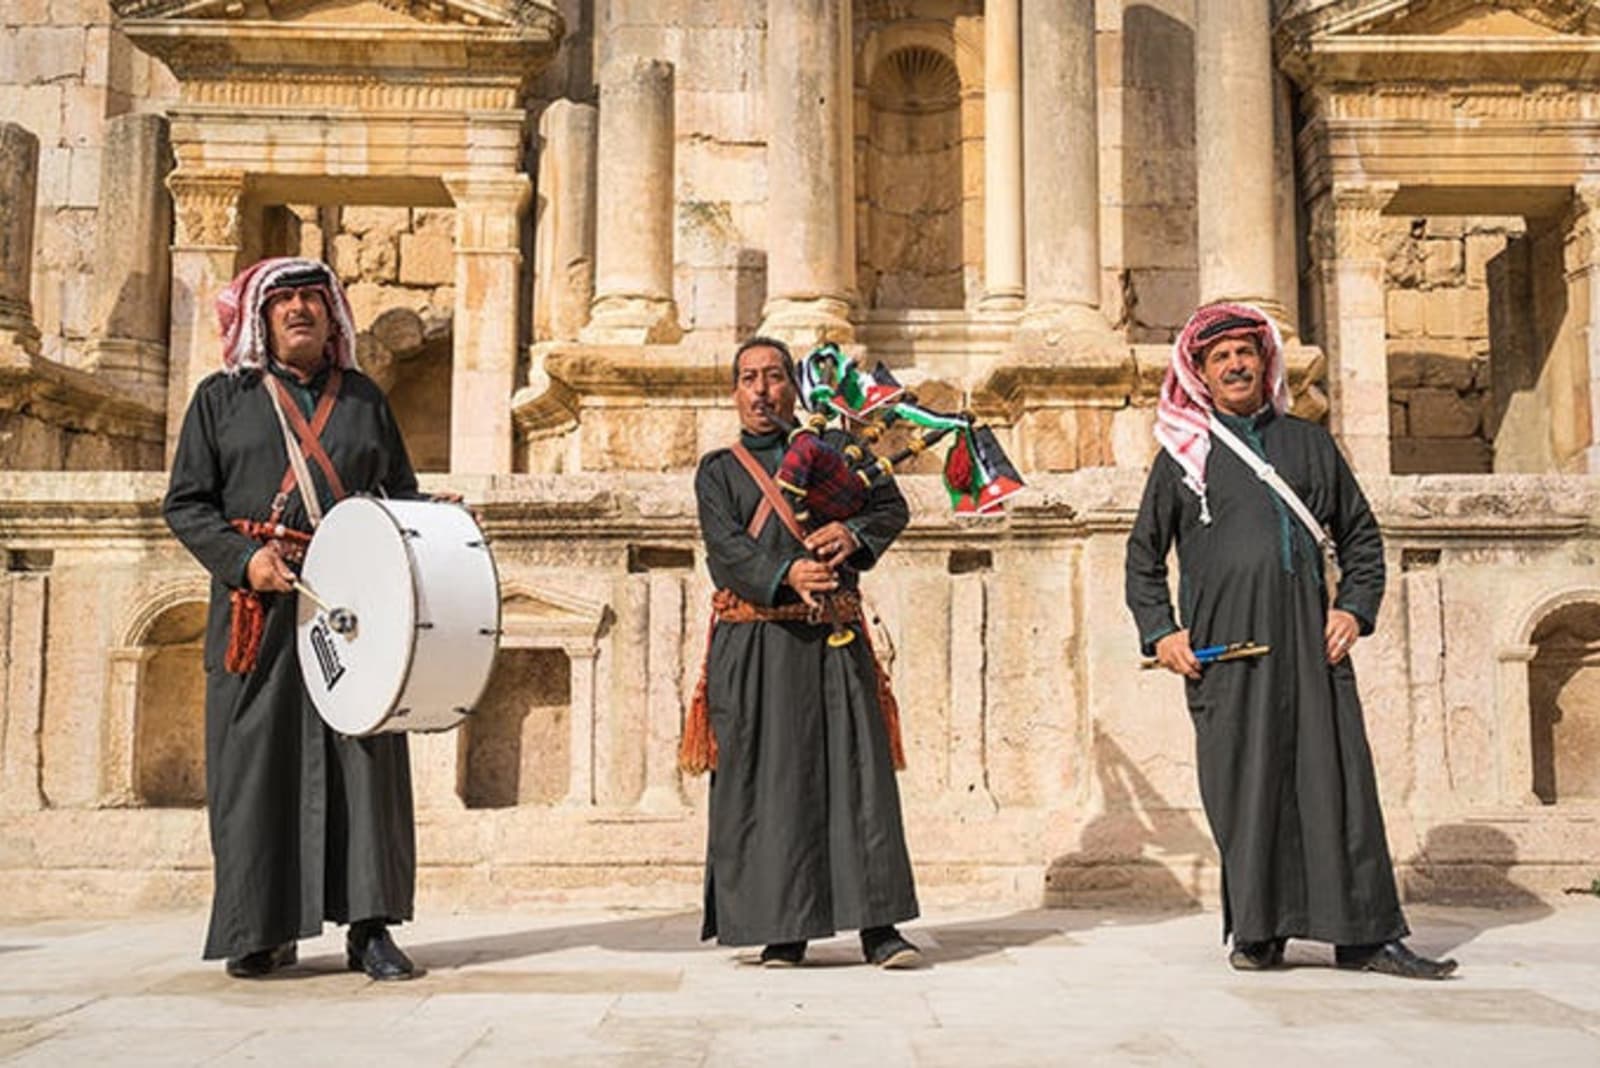 rs-pipers-of-jerash.jpg